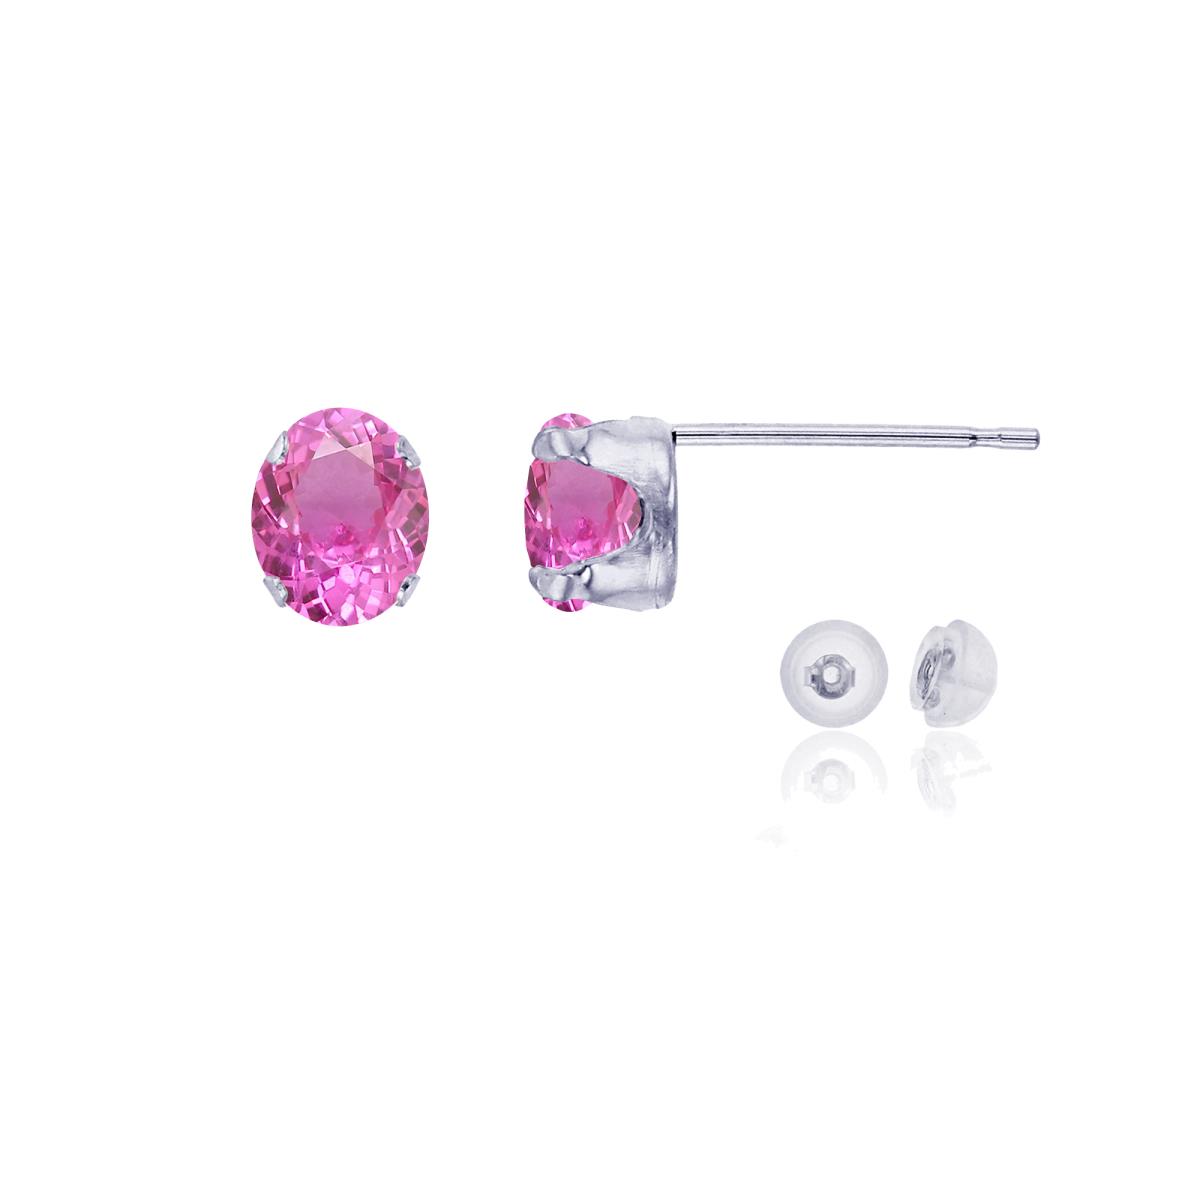 14K White Gold 6x4mm Oval Cr Pink Sapphire Stud Earring with Silicone Back